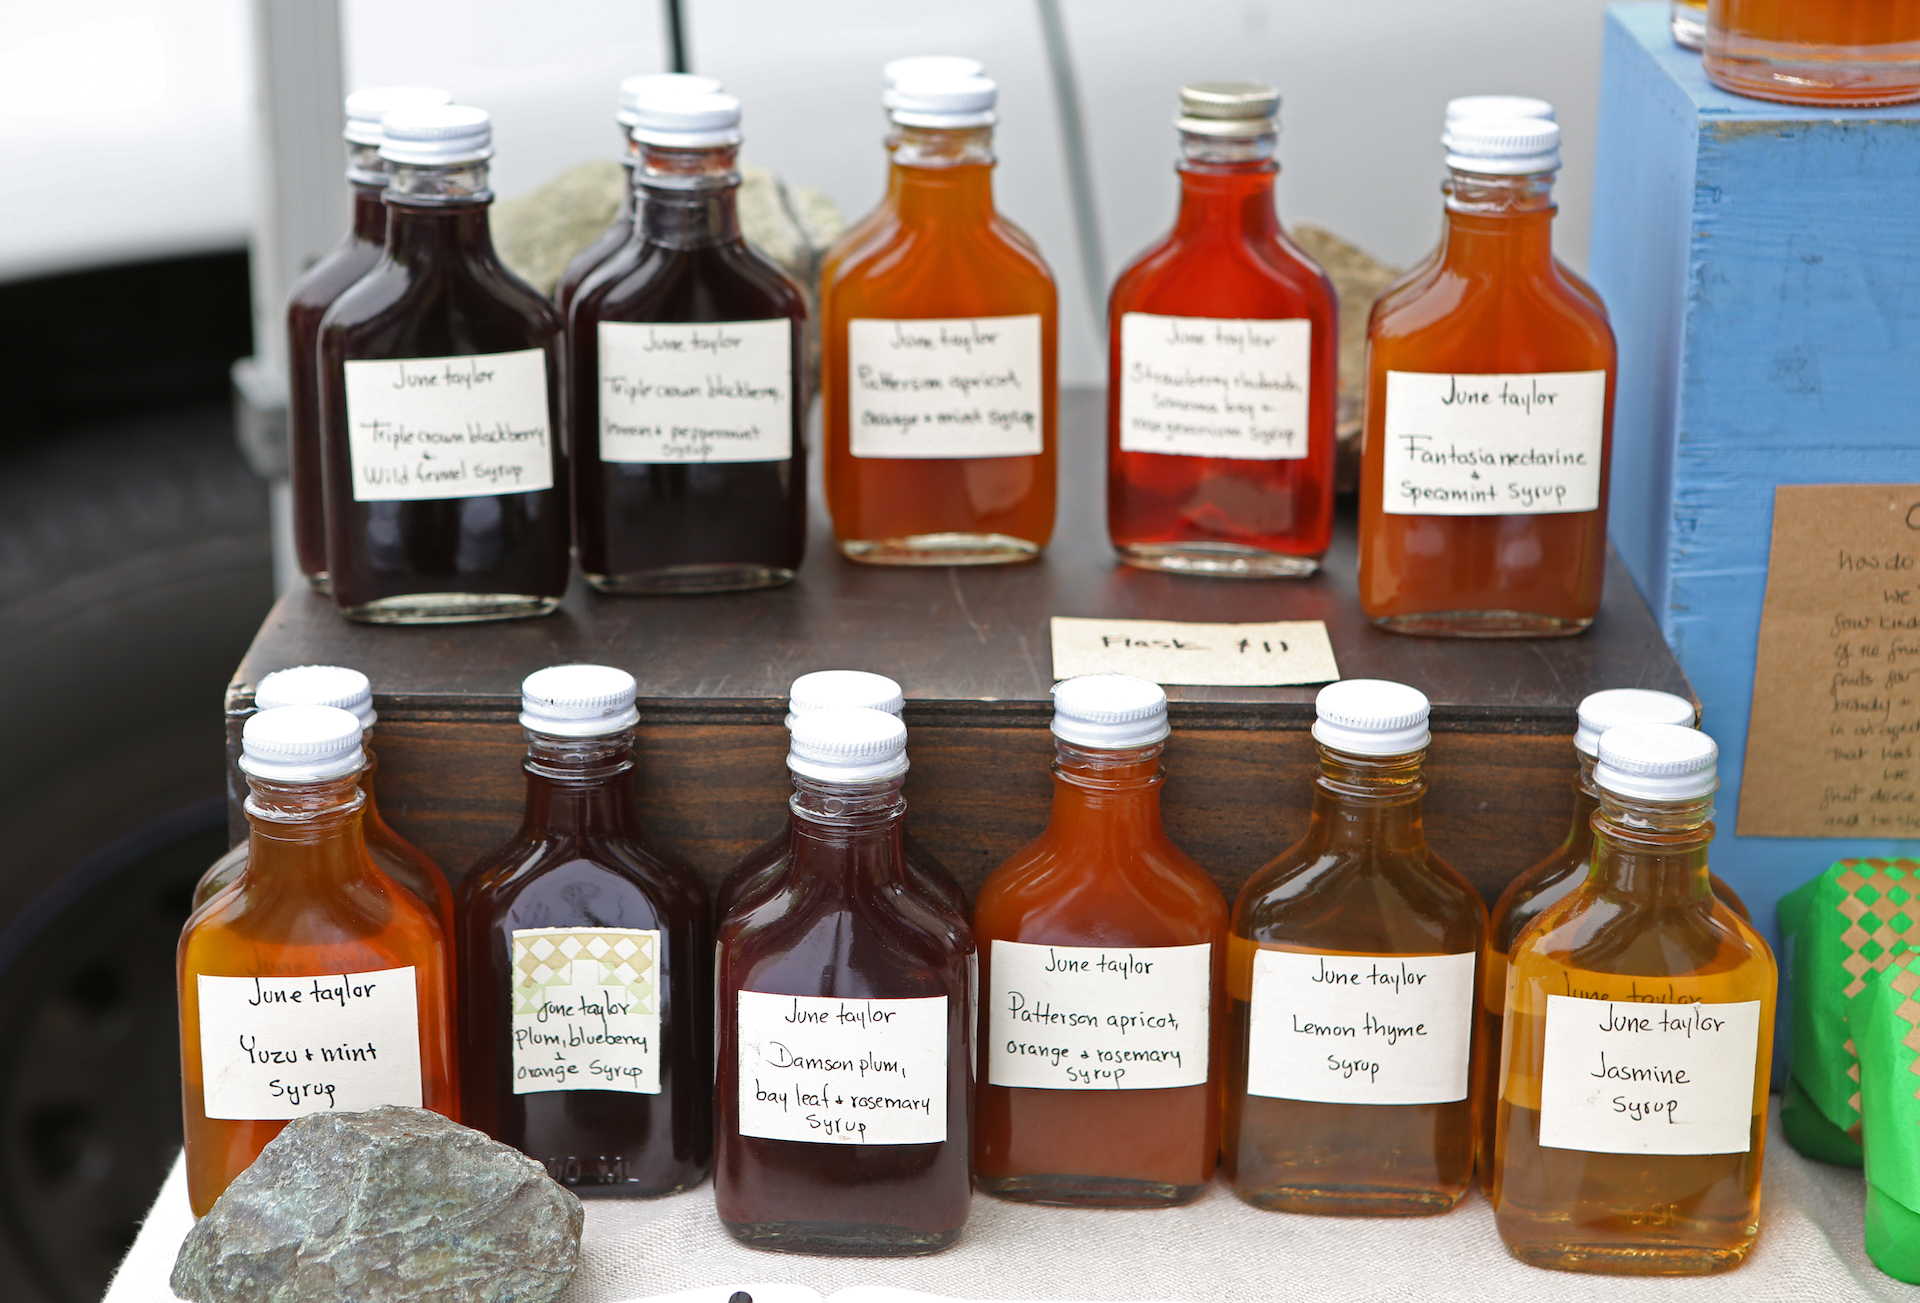 June Taylor's unique herbal, floral, and fruit syrups.